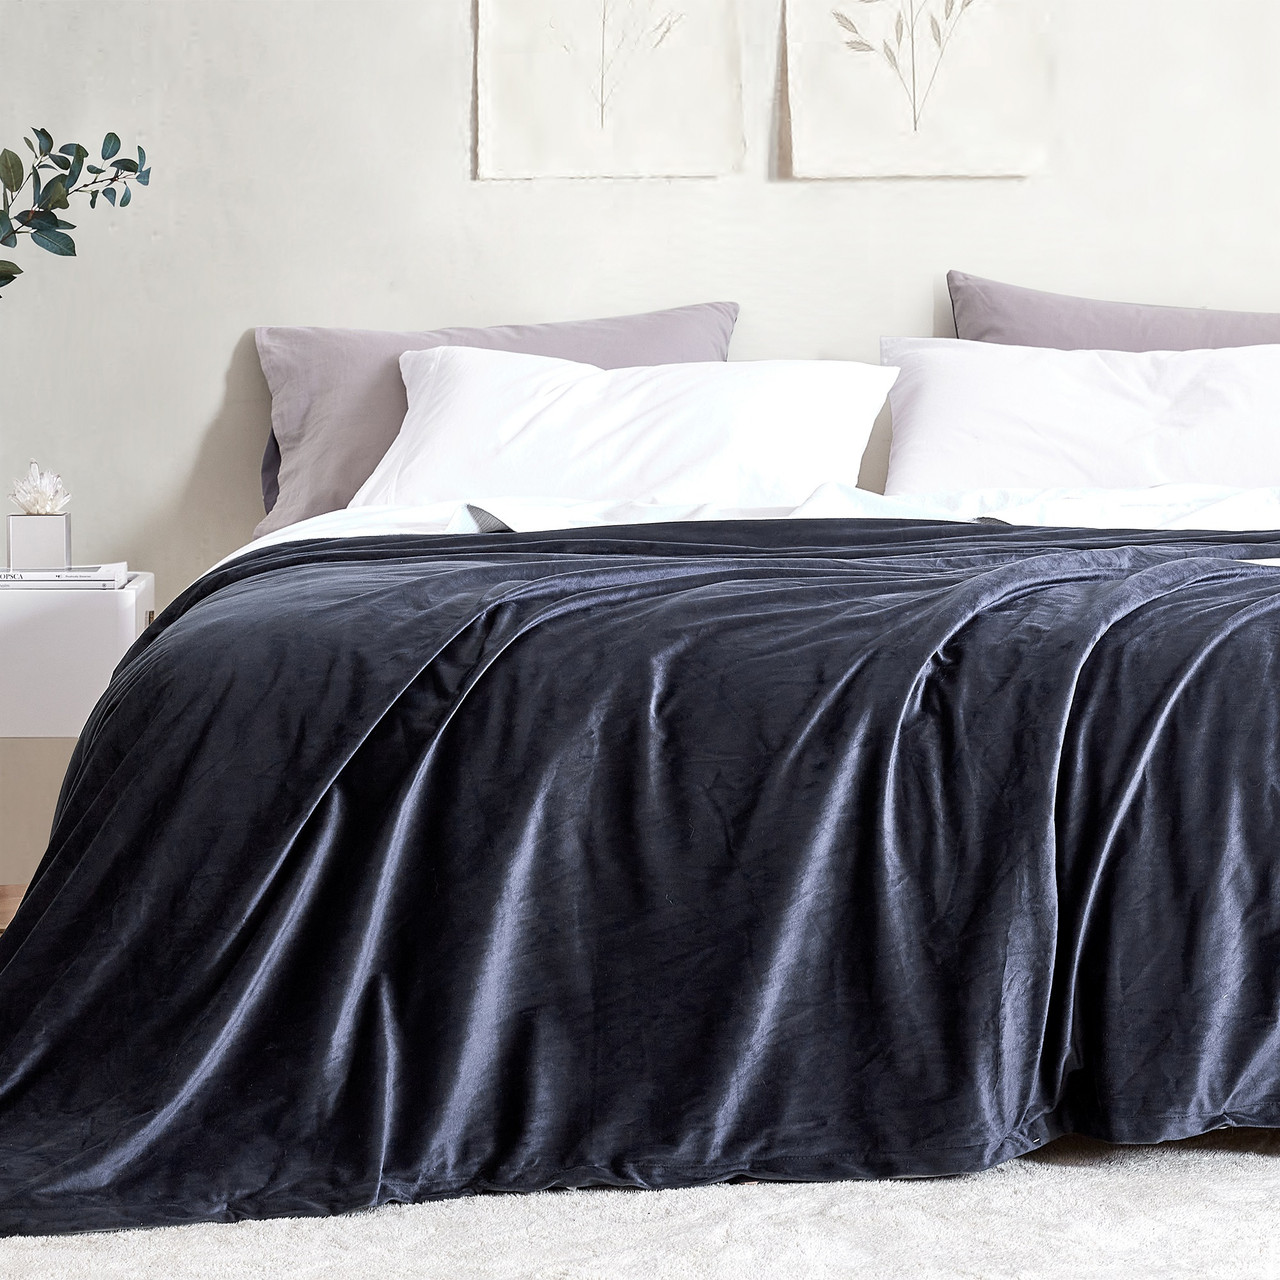 Coma Inducer Are You Kidding? Duvet Cover by Byourbed Royal Blue/White, Size: King